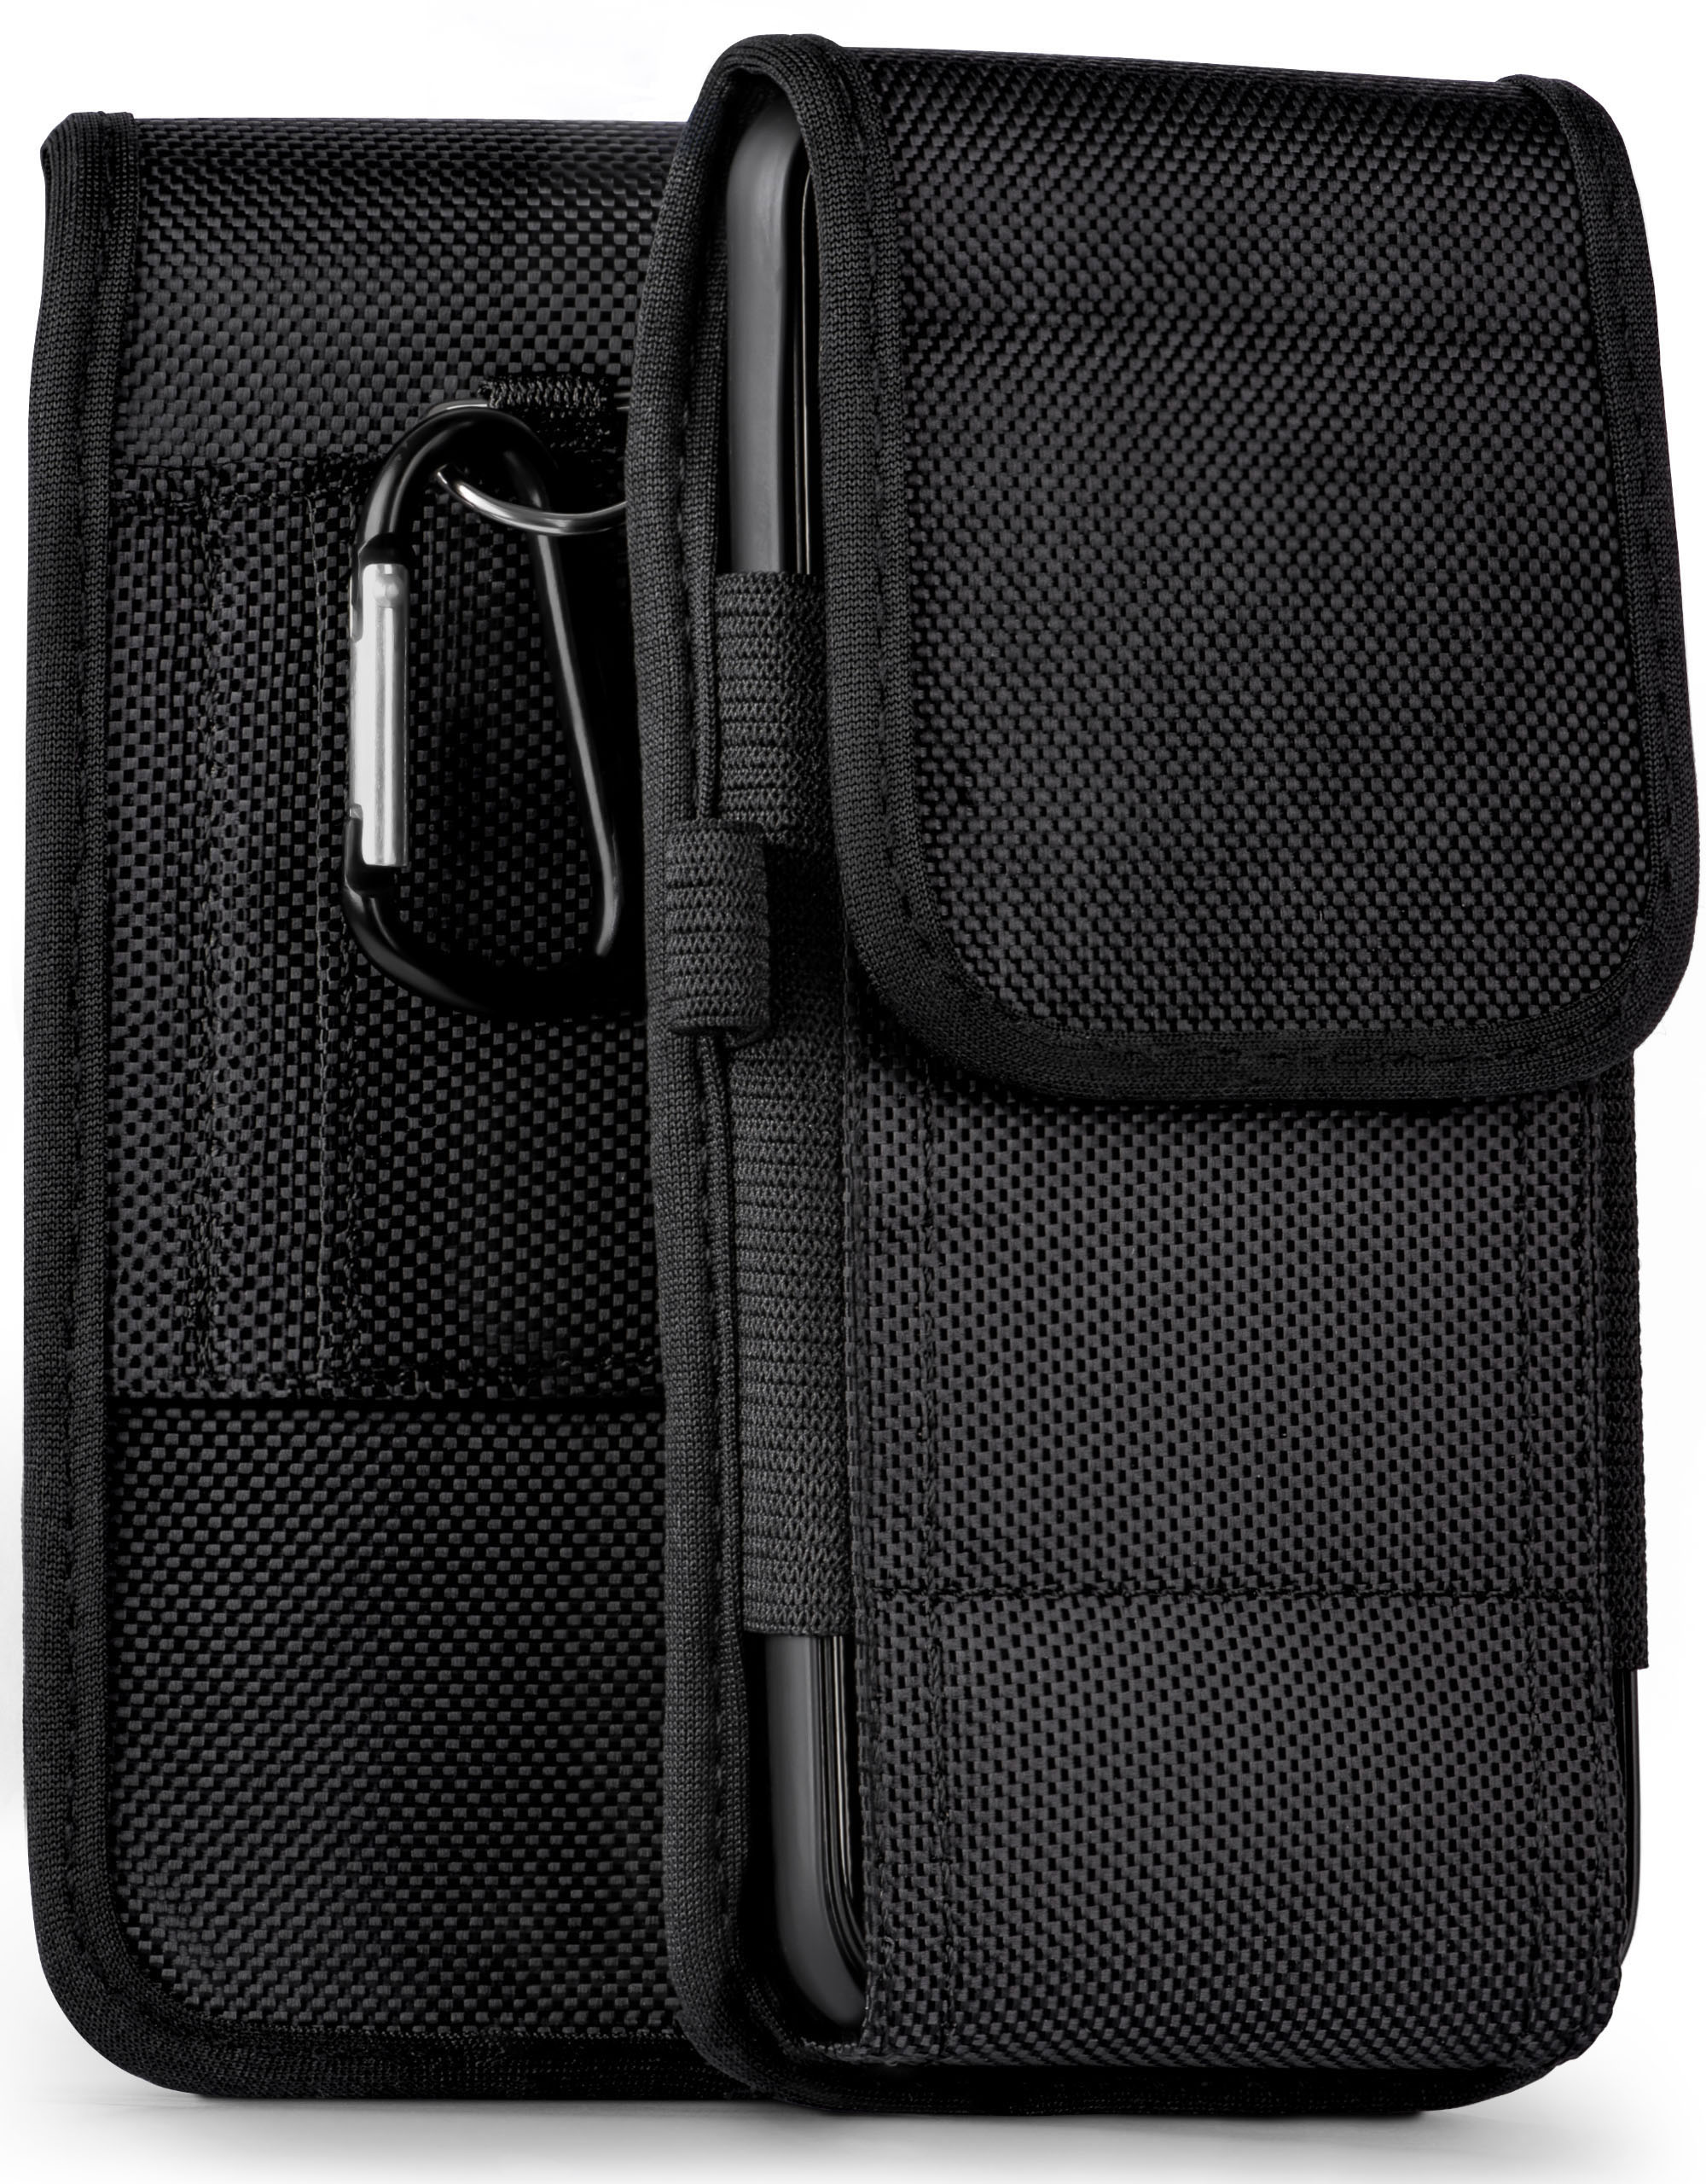 MOEX Agility Case, Holster, Gigaset, GS185, Trail